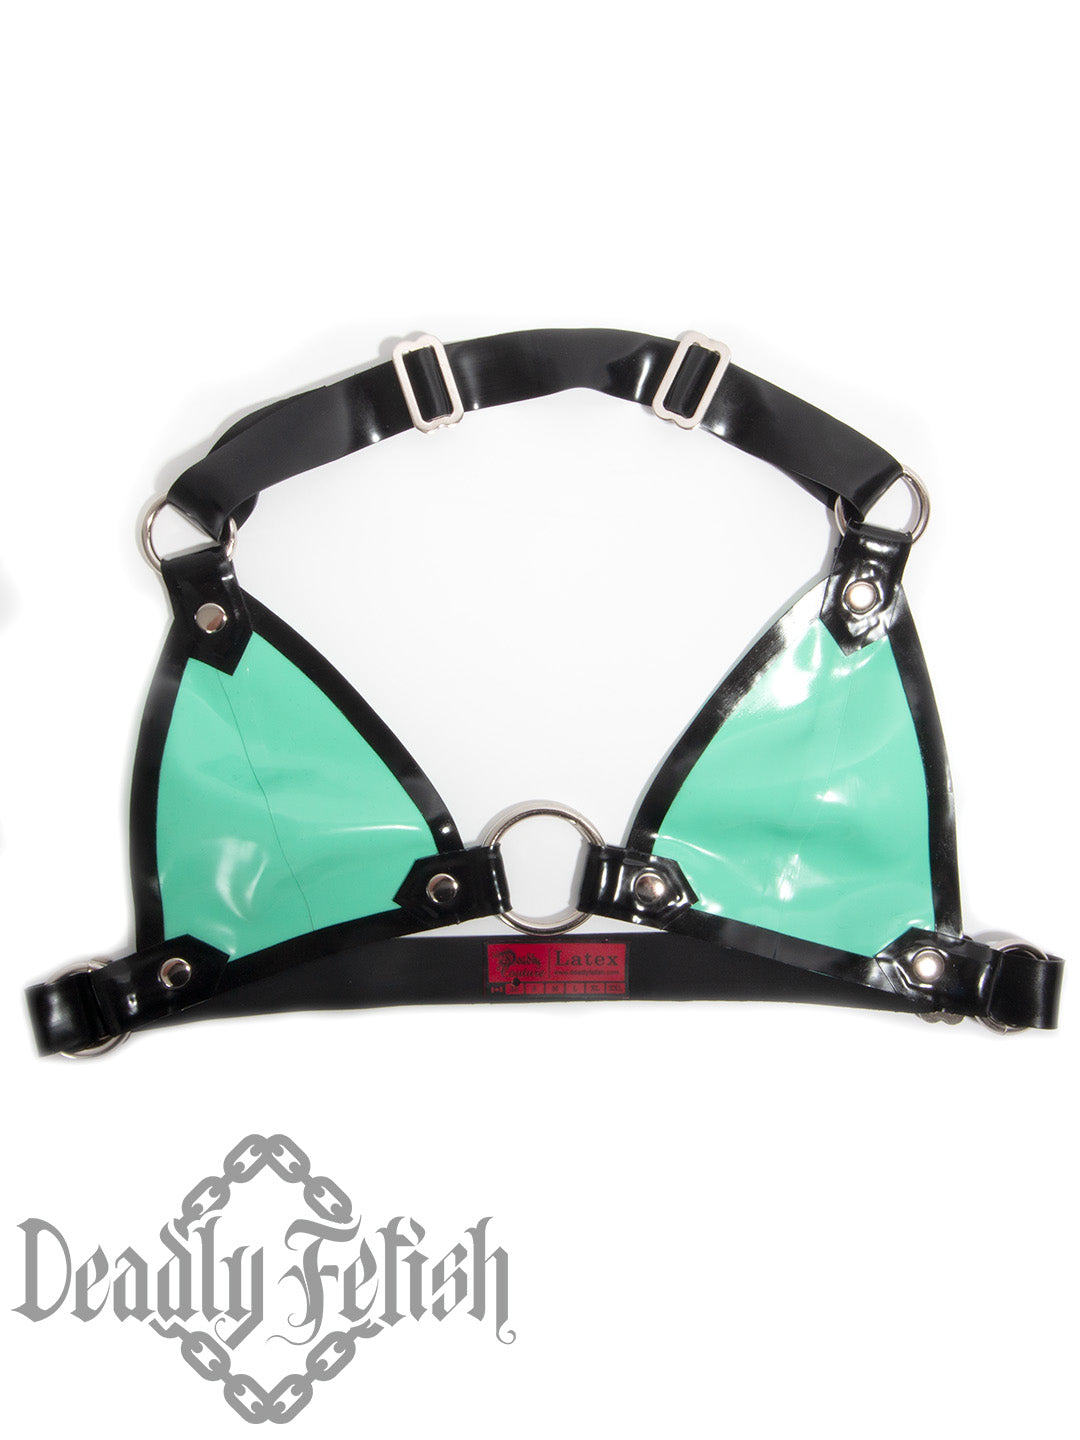 Deadly Fetish Made-to-Order Latex: Bra #08